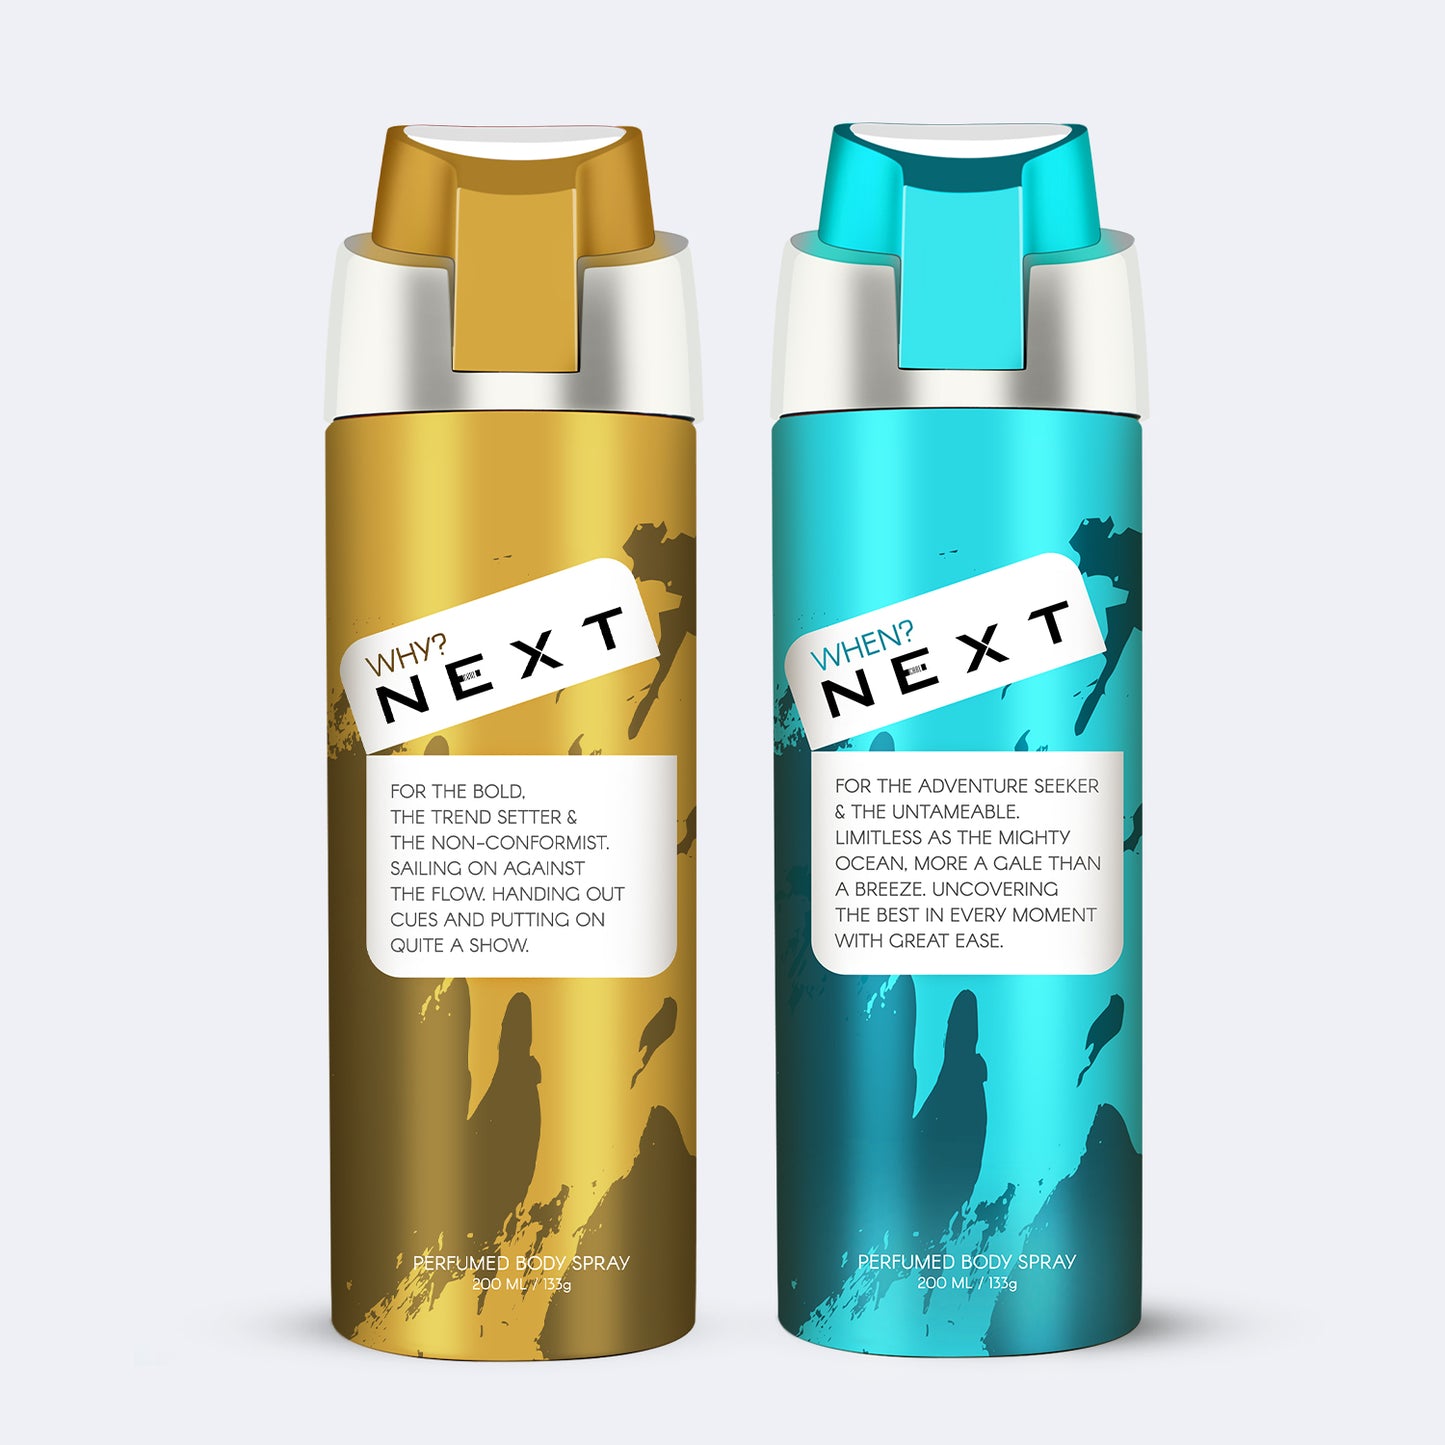 Pack of 2 Deodorants -When? and Why? - 200ml Each